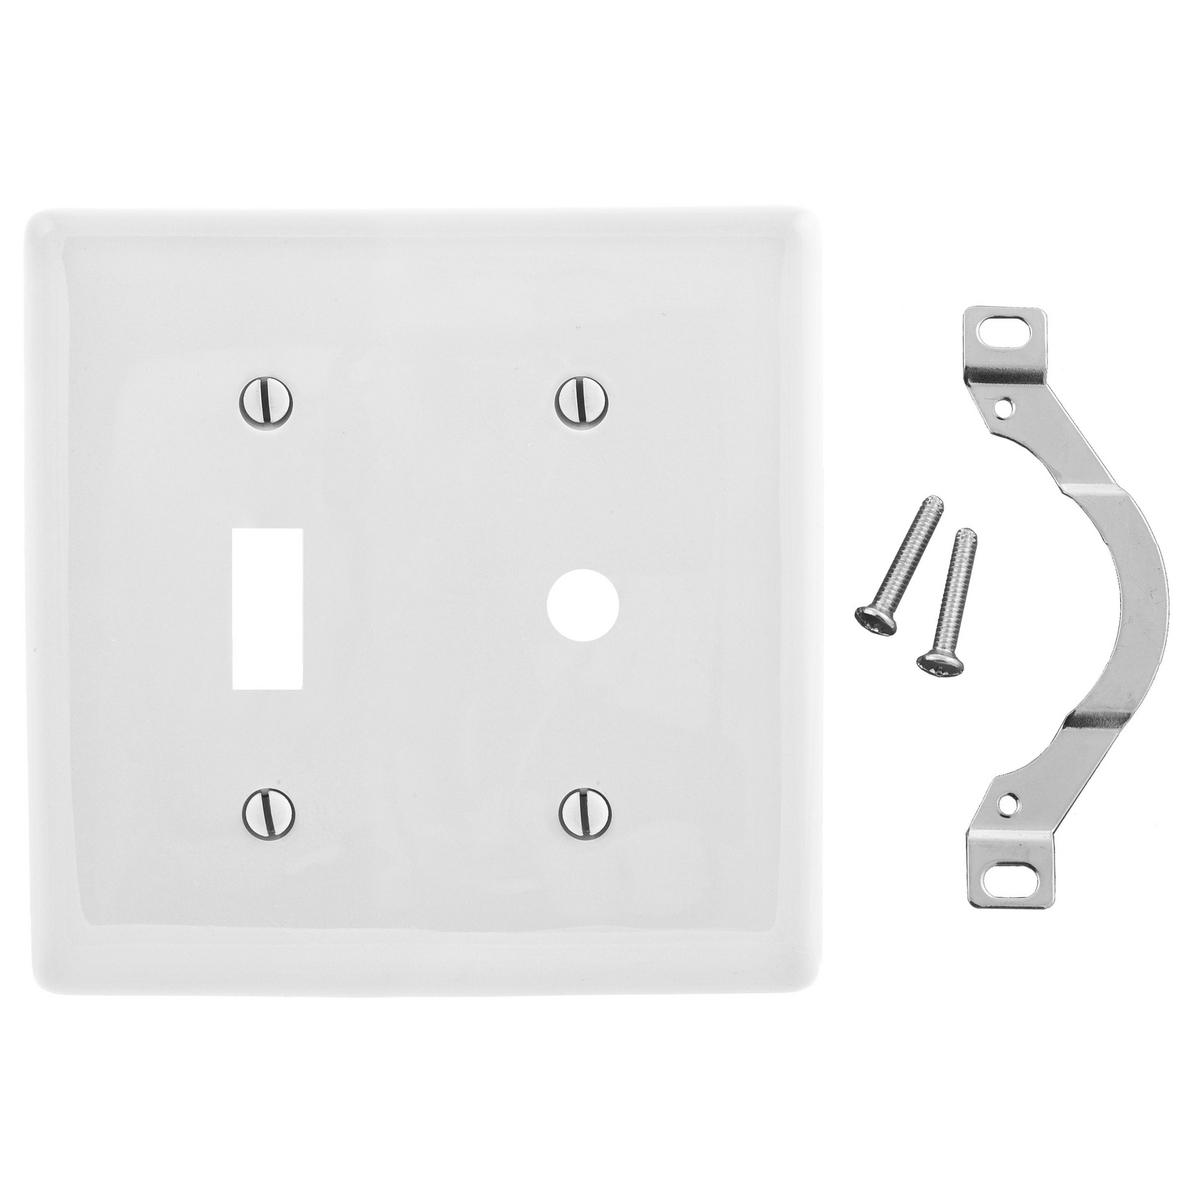 Hubbell NP112W Wallplates, Nylon, 2-Gang, 1) Toggle, 1) .406" Opening, White  ; Reinforcement ribs for extra strength ; High-impact, self-extinguishing nylon material ; Captive screw feature holds mounting screw in place ; Standard Size is 1/8" larger to give you extra 